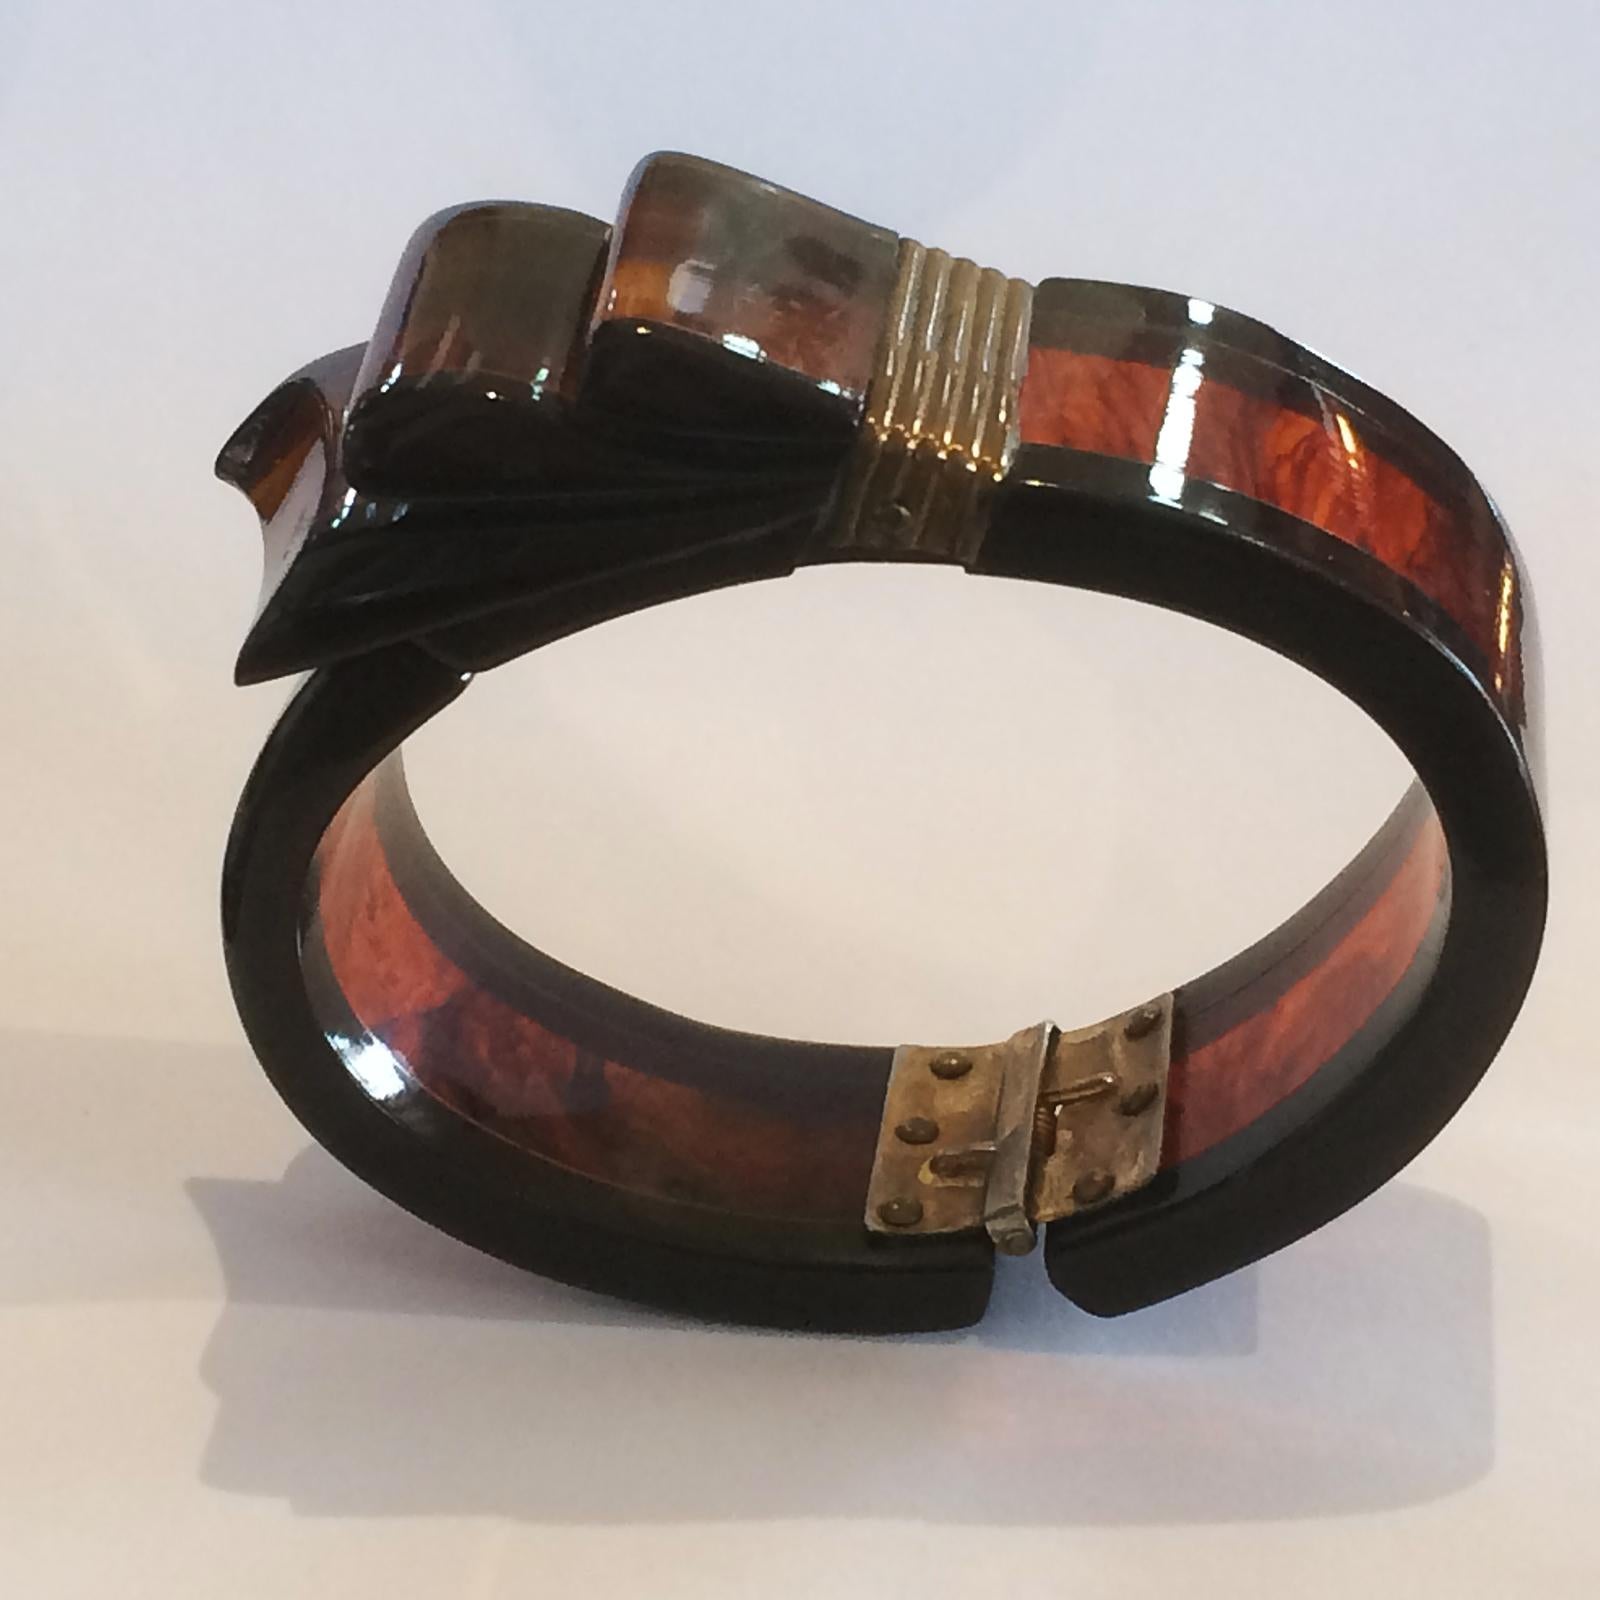 Rare Art Deco Black and Root beer bakelite ribbon hinged clamper bangle In Good Condition For Sale In Daylesford, Victoria